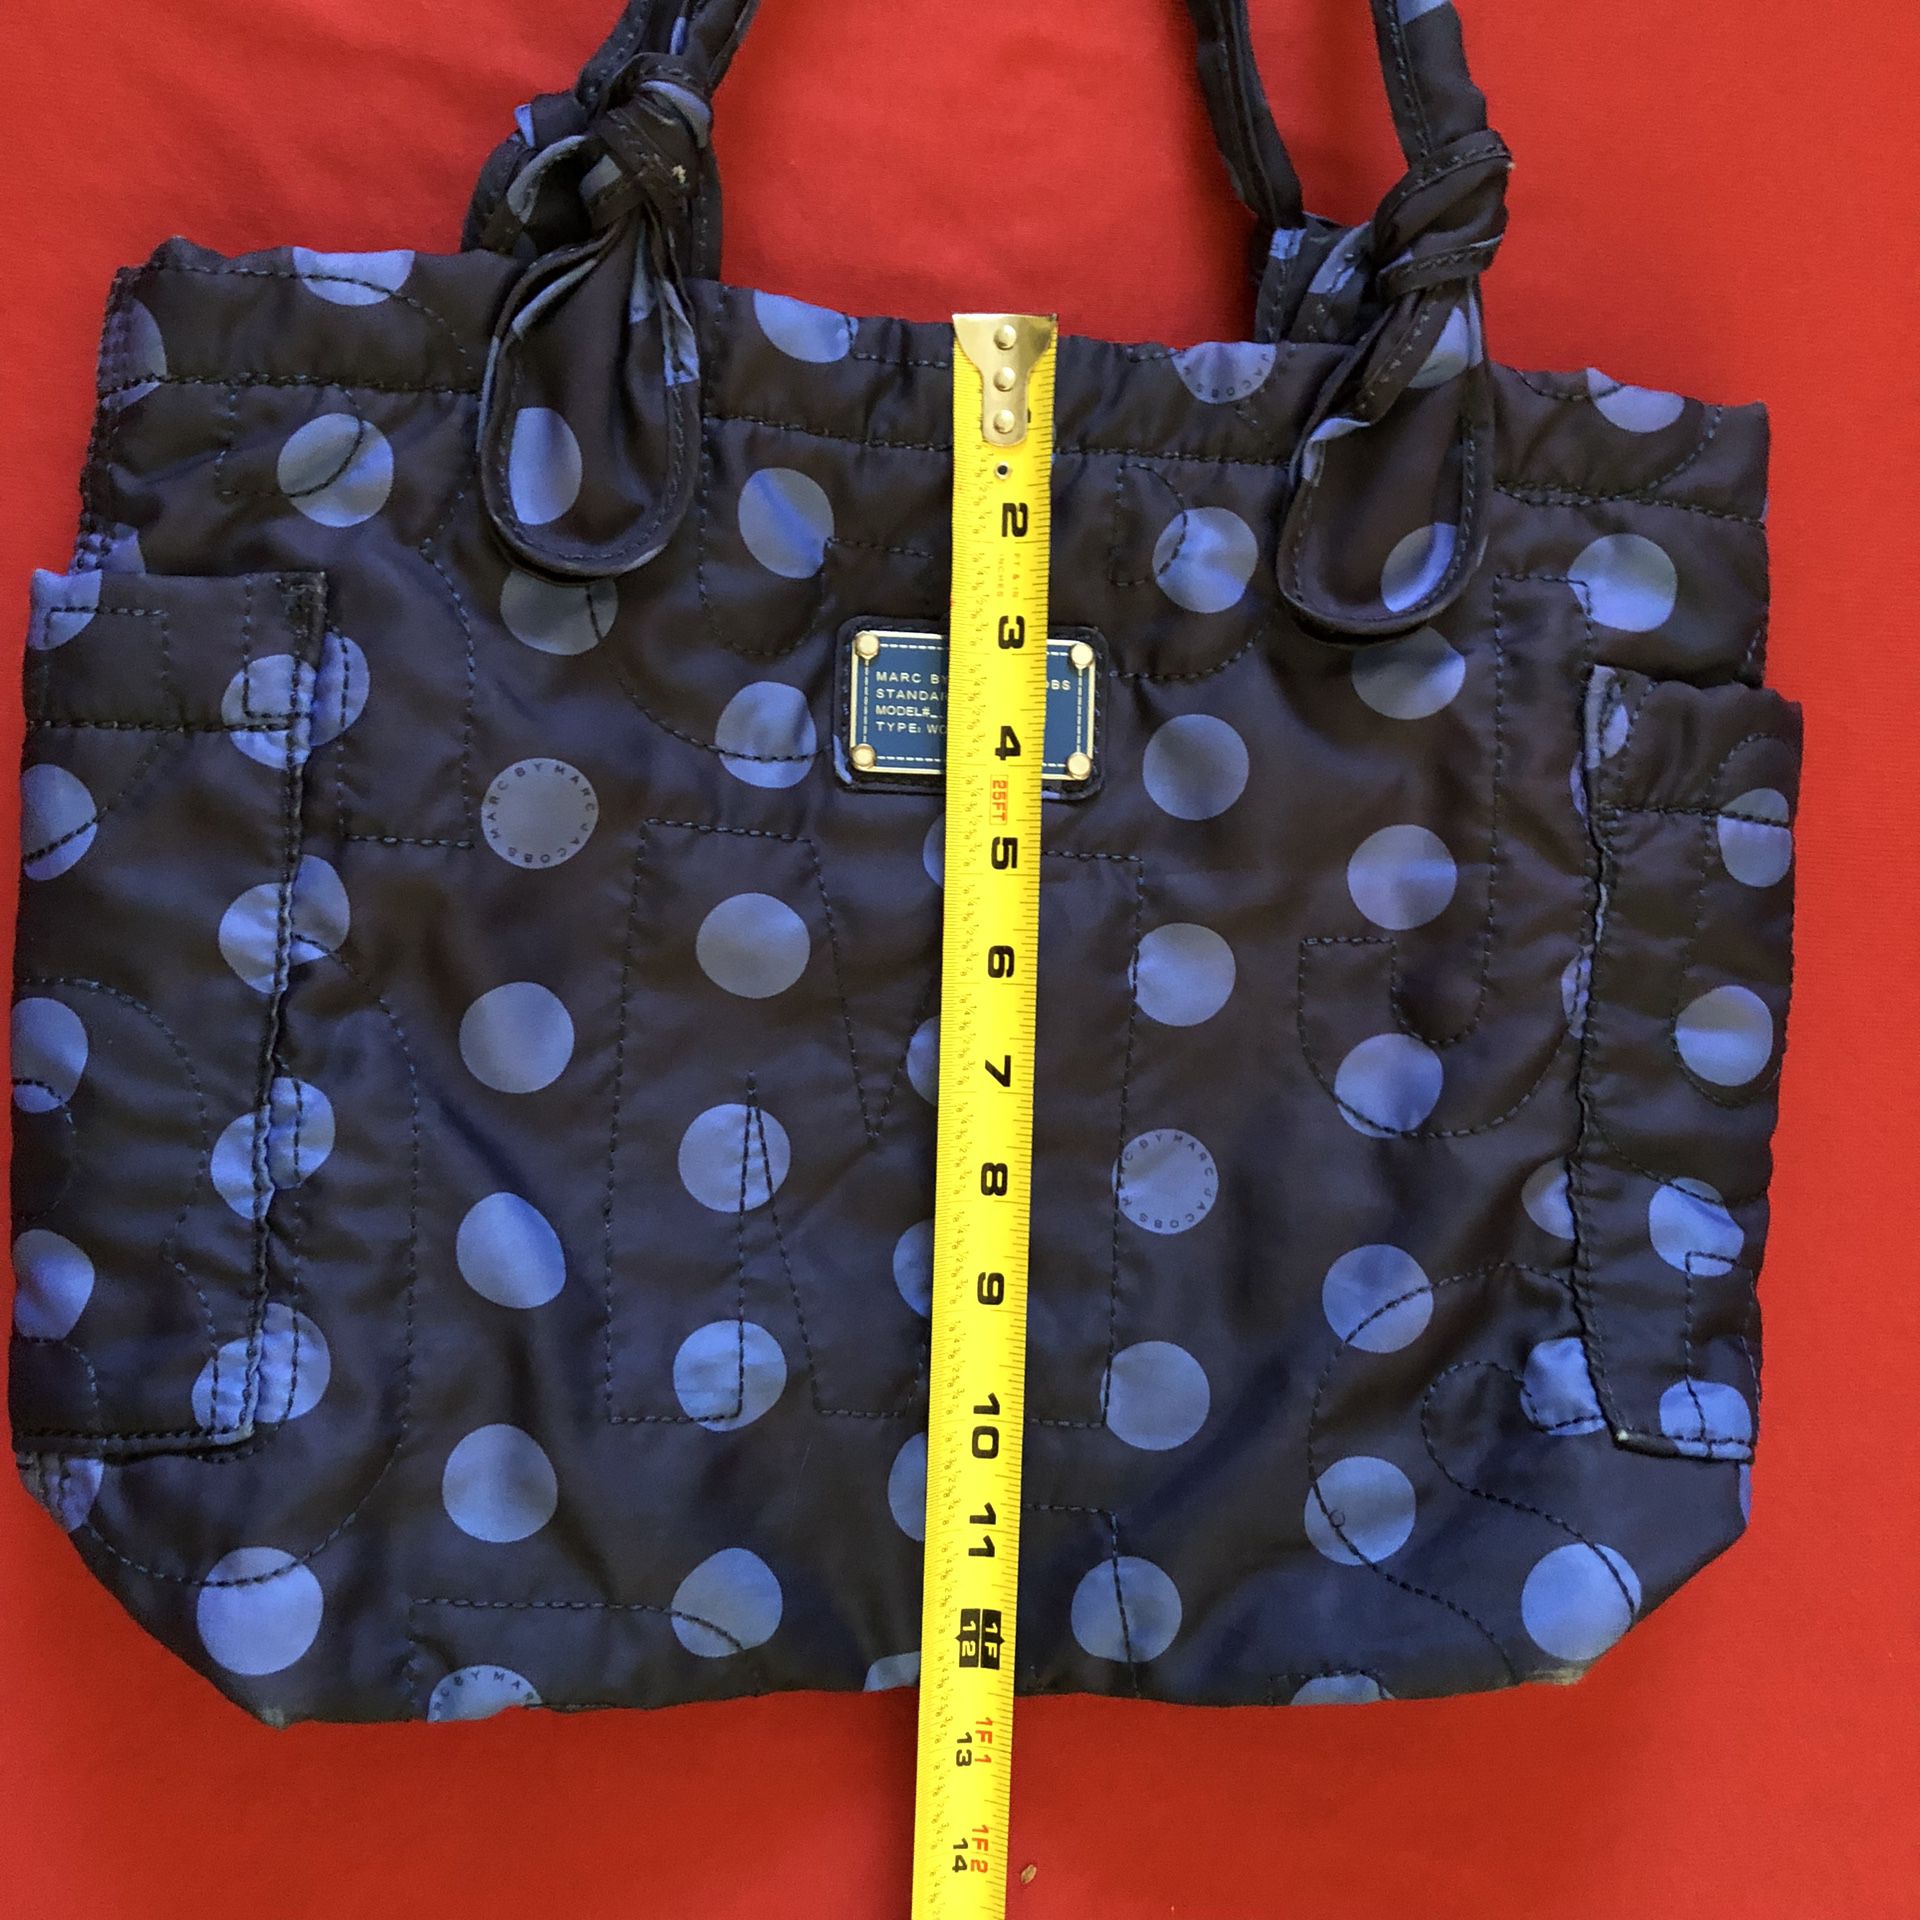 Marc by Marc jacobs nylon tote bag